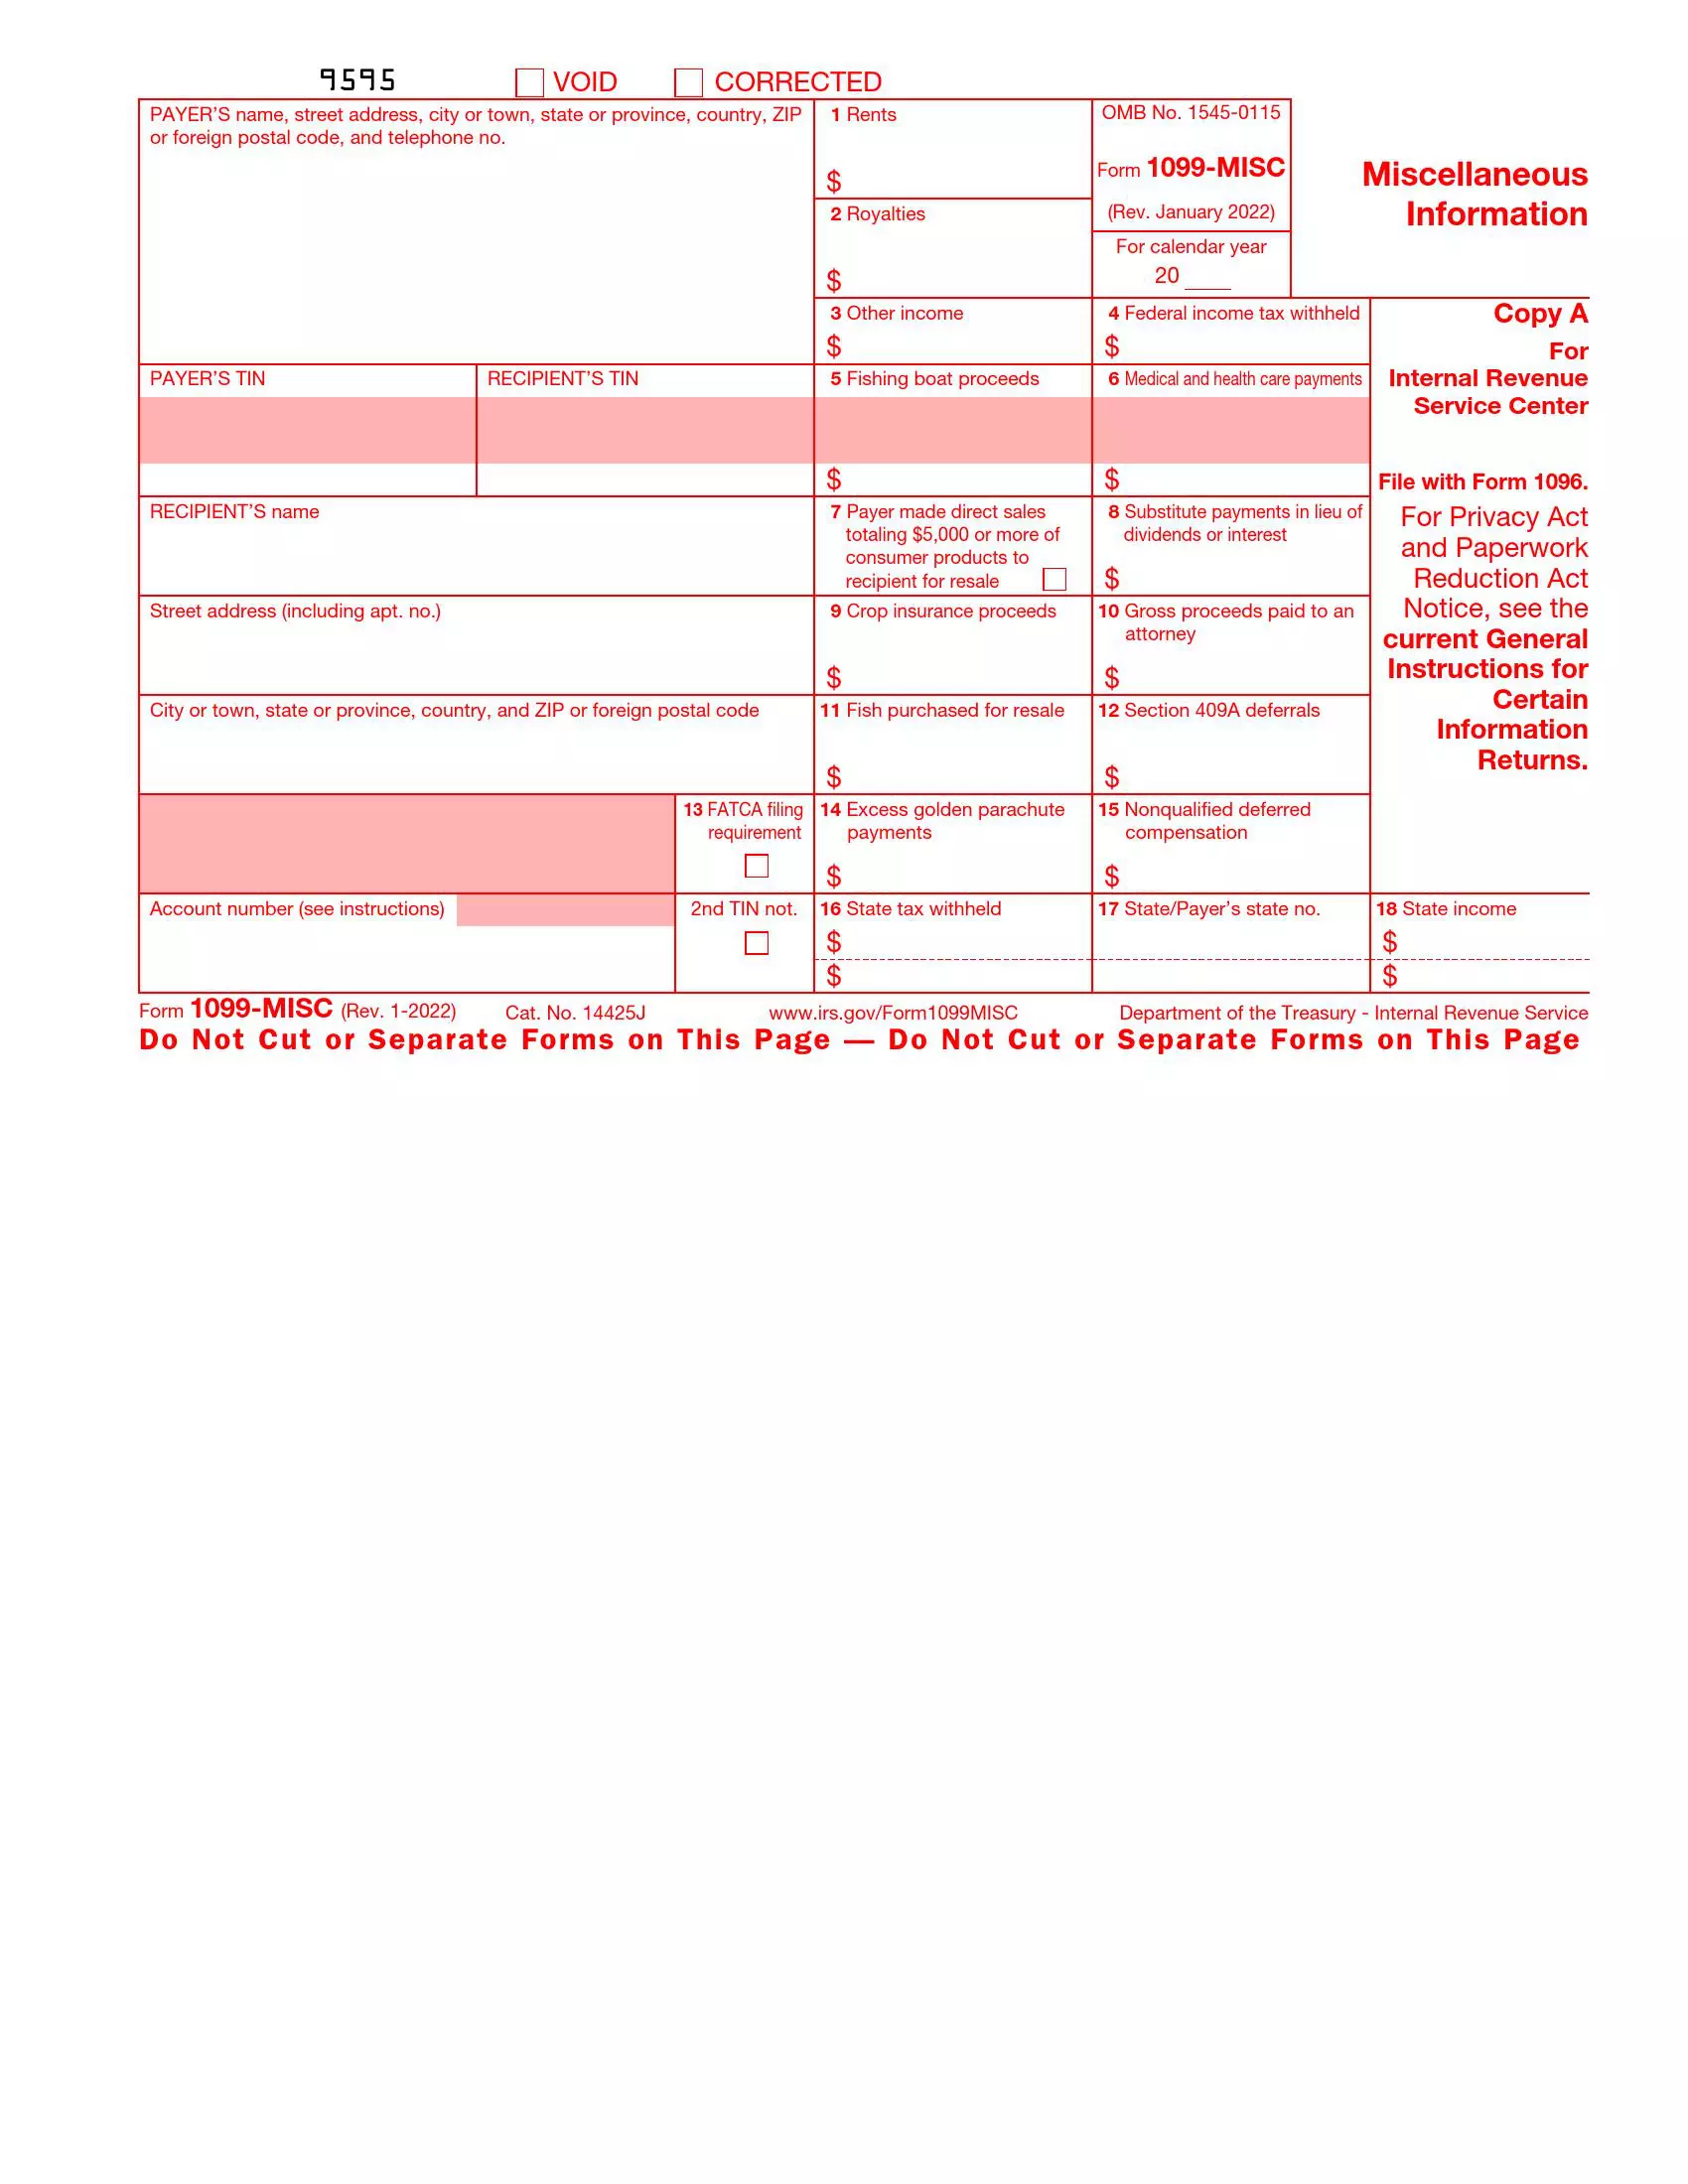 irs form 1099 misc rev 01 2022 preview